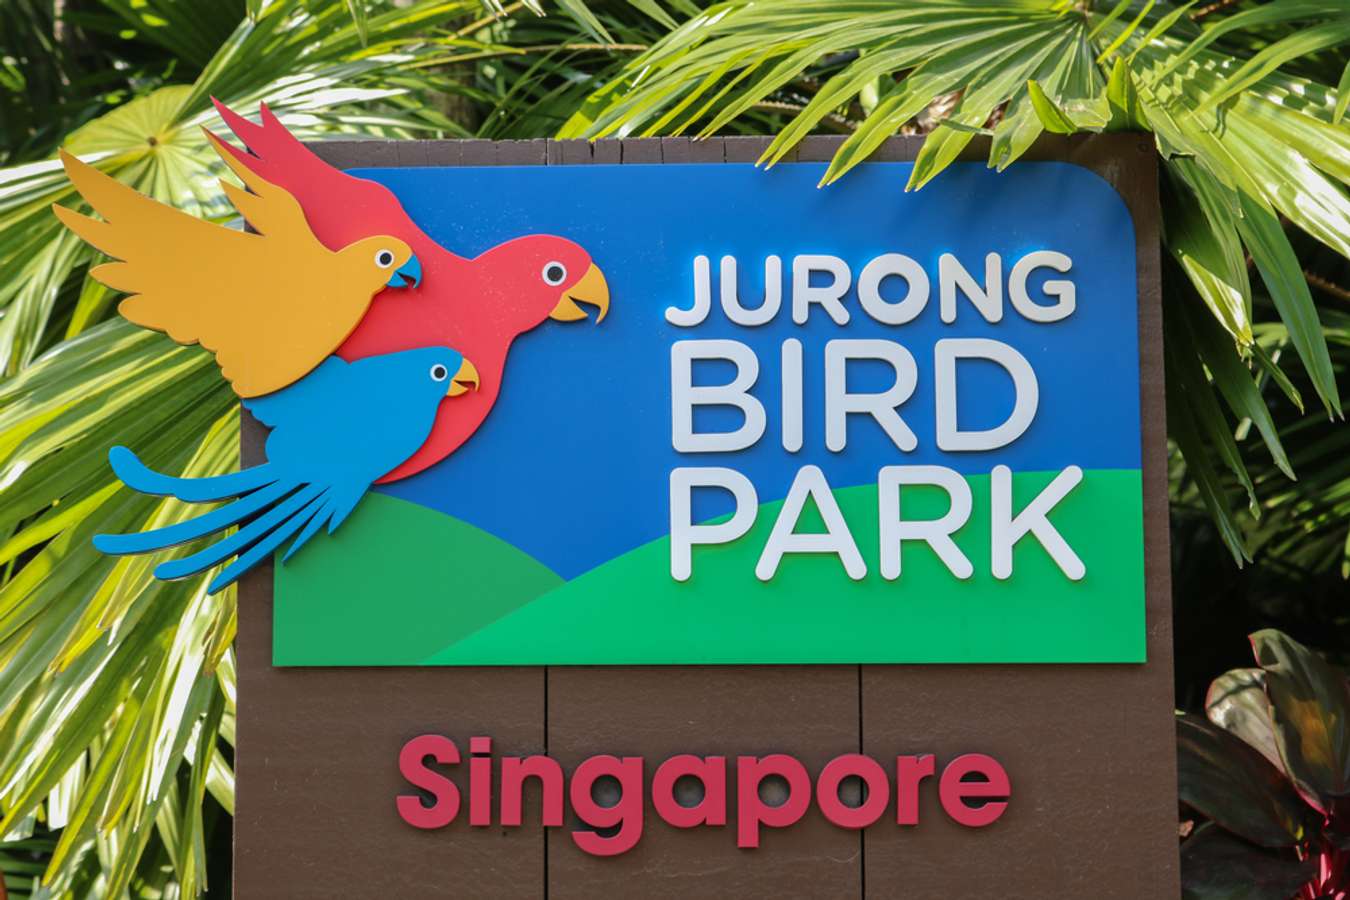 Jurong Bird Park - Things to do in Jurong